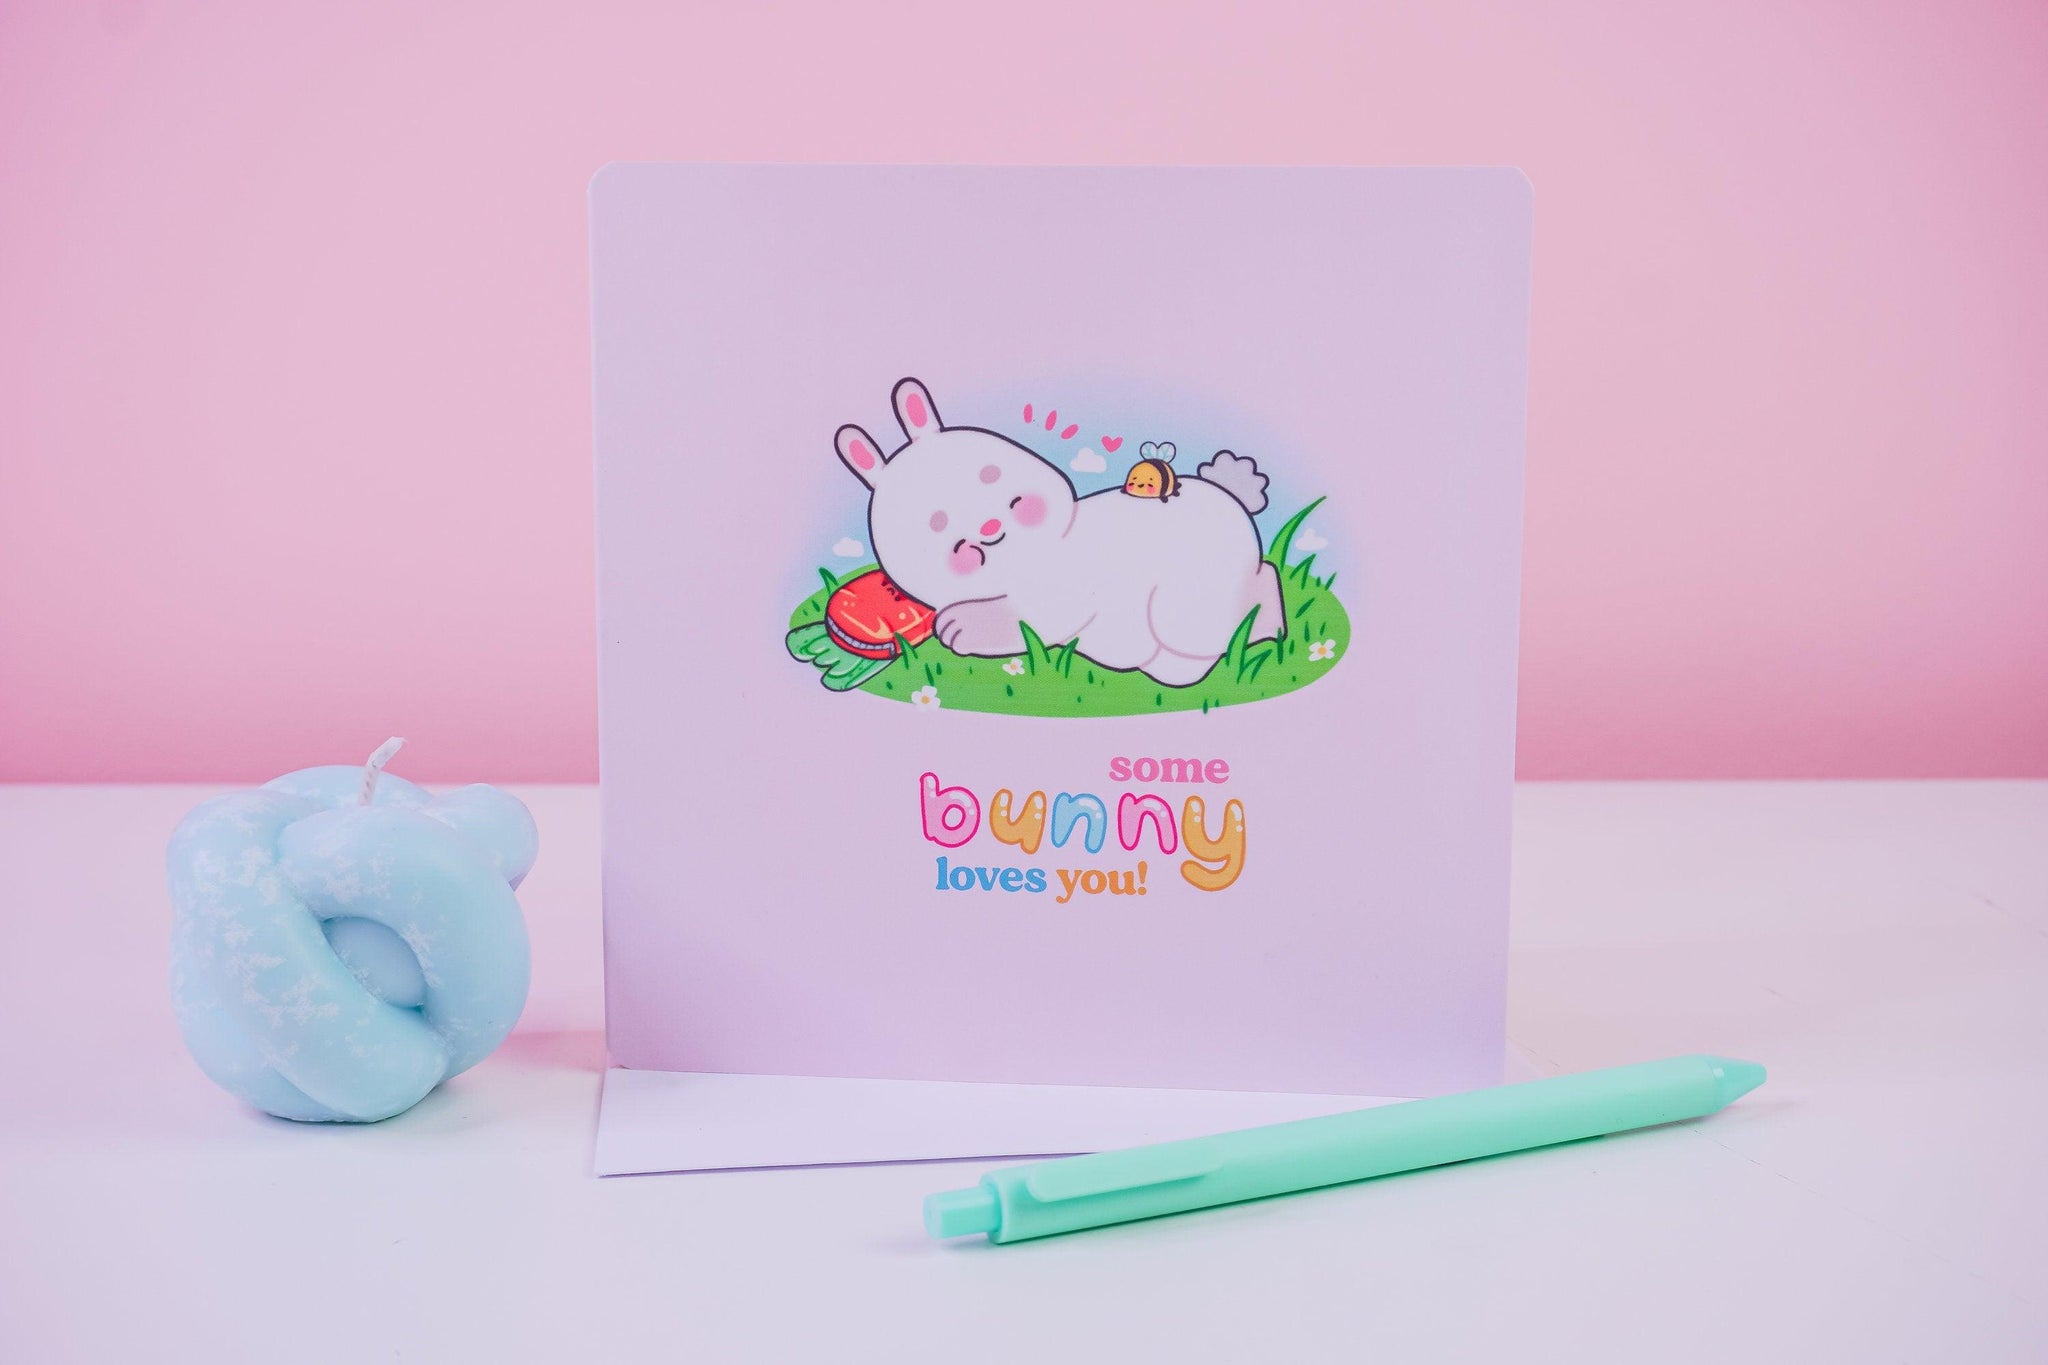 Some Bunny Loves you! Greetings Card - Katnipp Illustrations